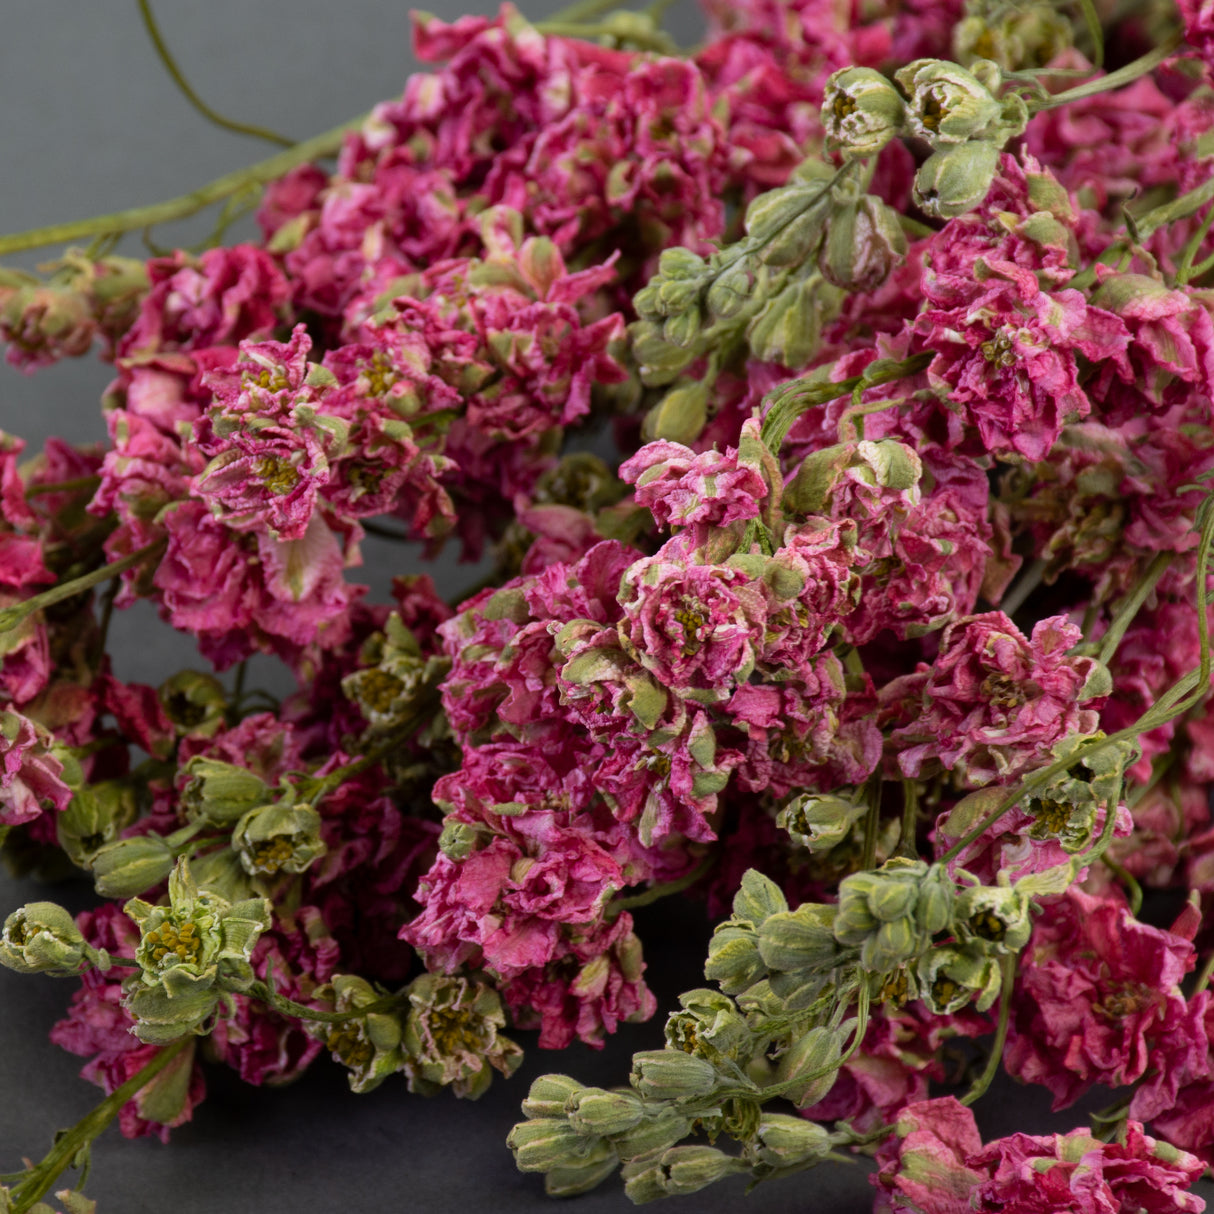 This image shows a bunch of dried, pink delphiniums, laid on a grey background